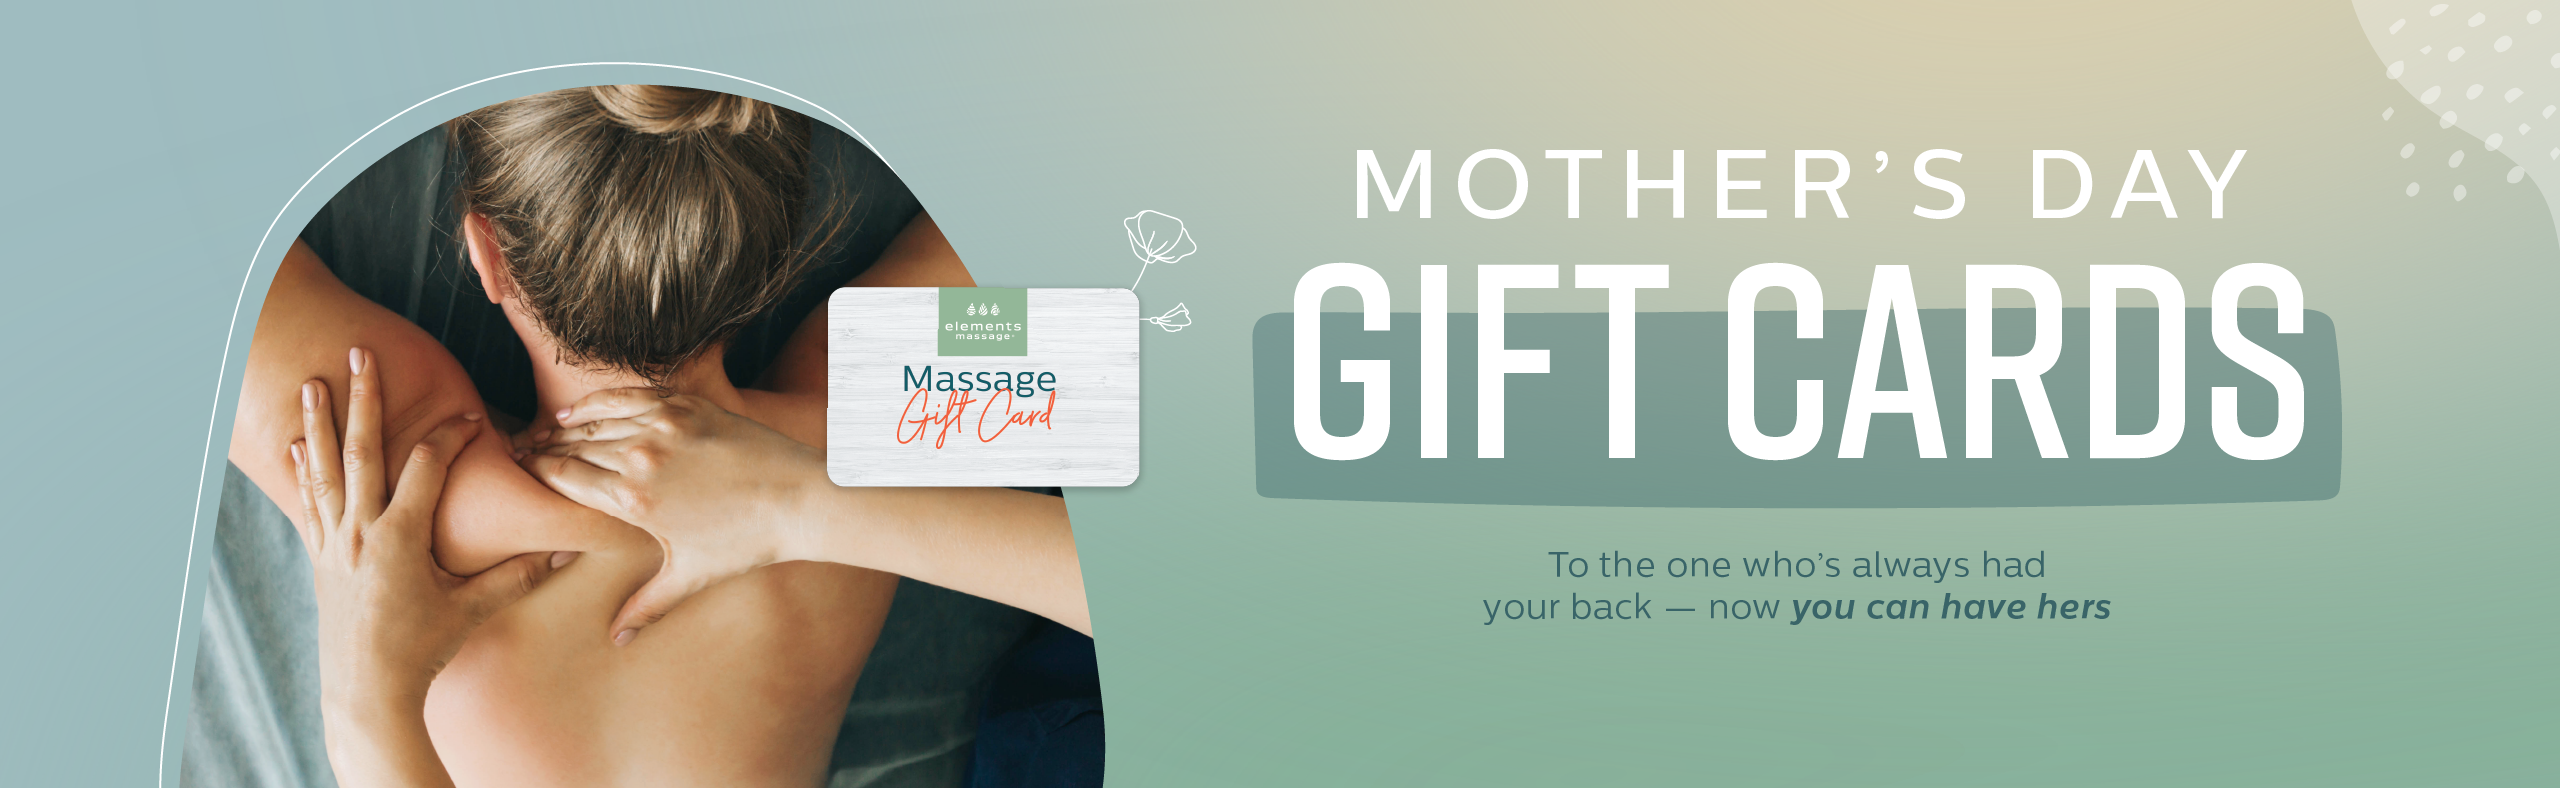 Mother's Day gift cards